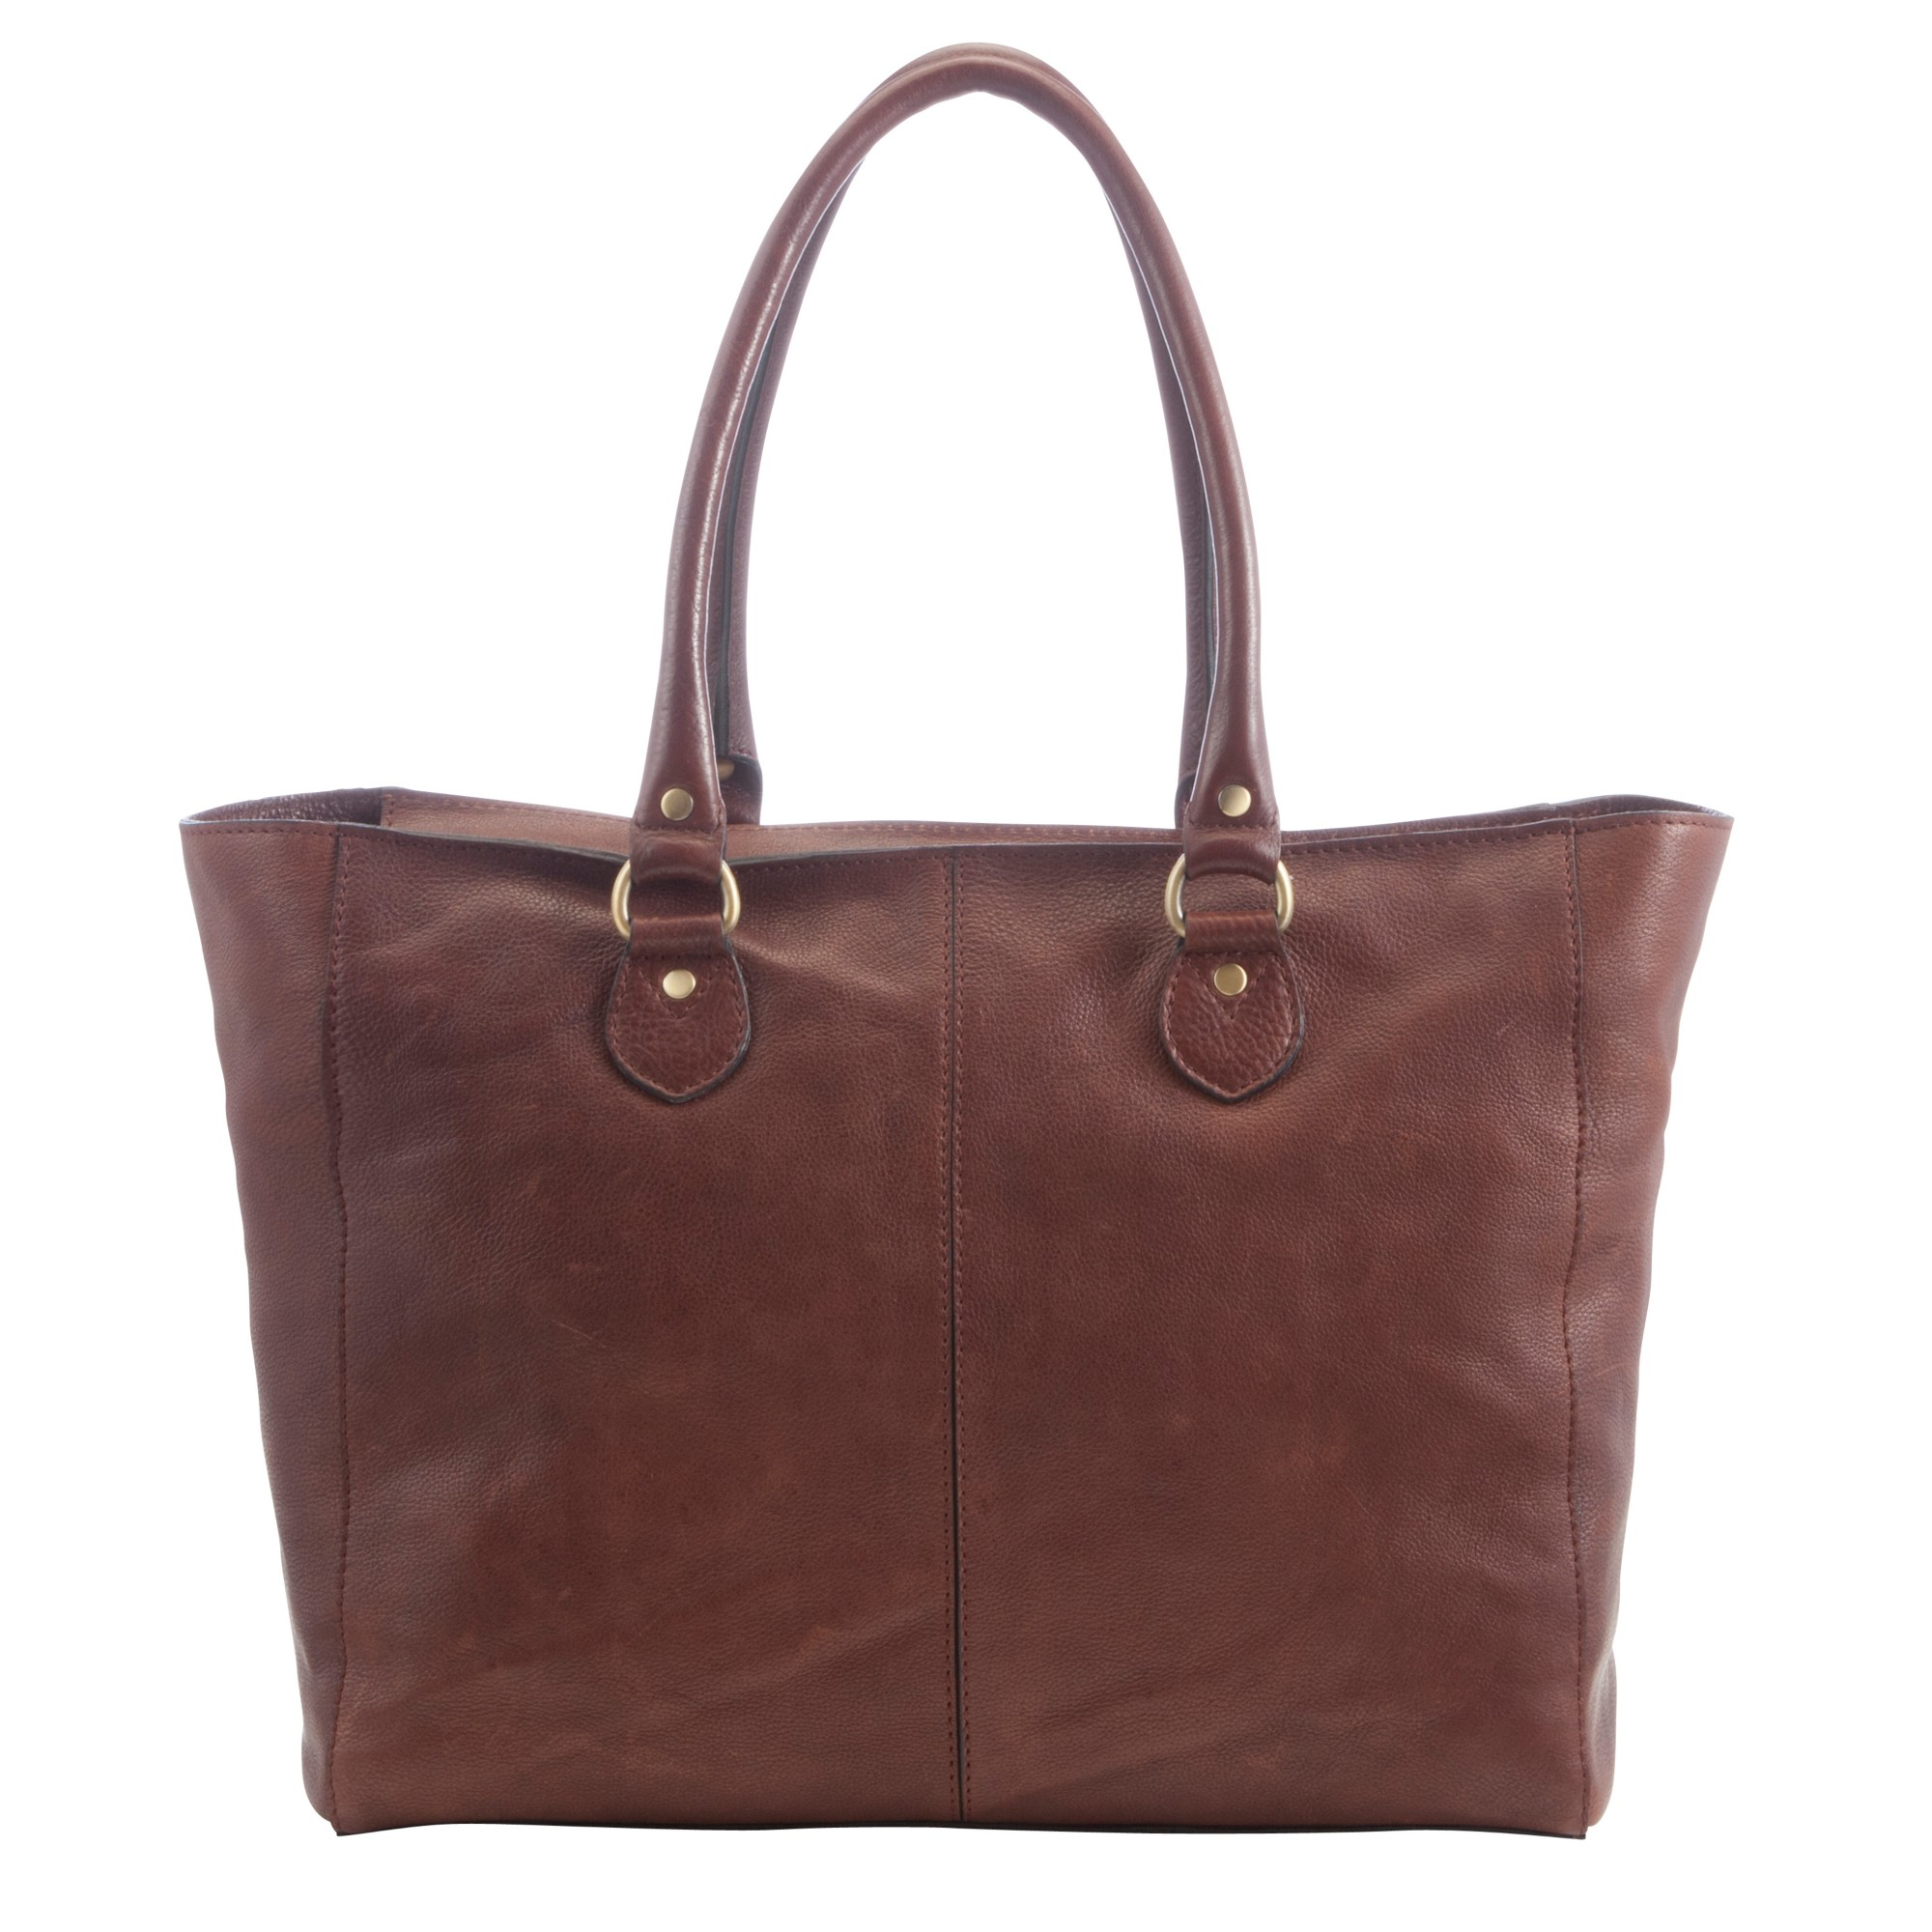 John lewis Winchester Large Leather Tote Bag in Brown (Dark Tan) | Lyst